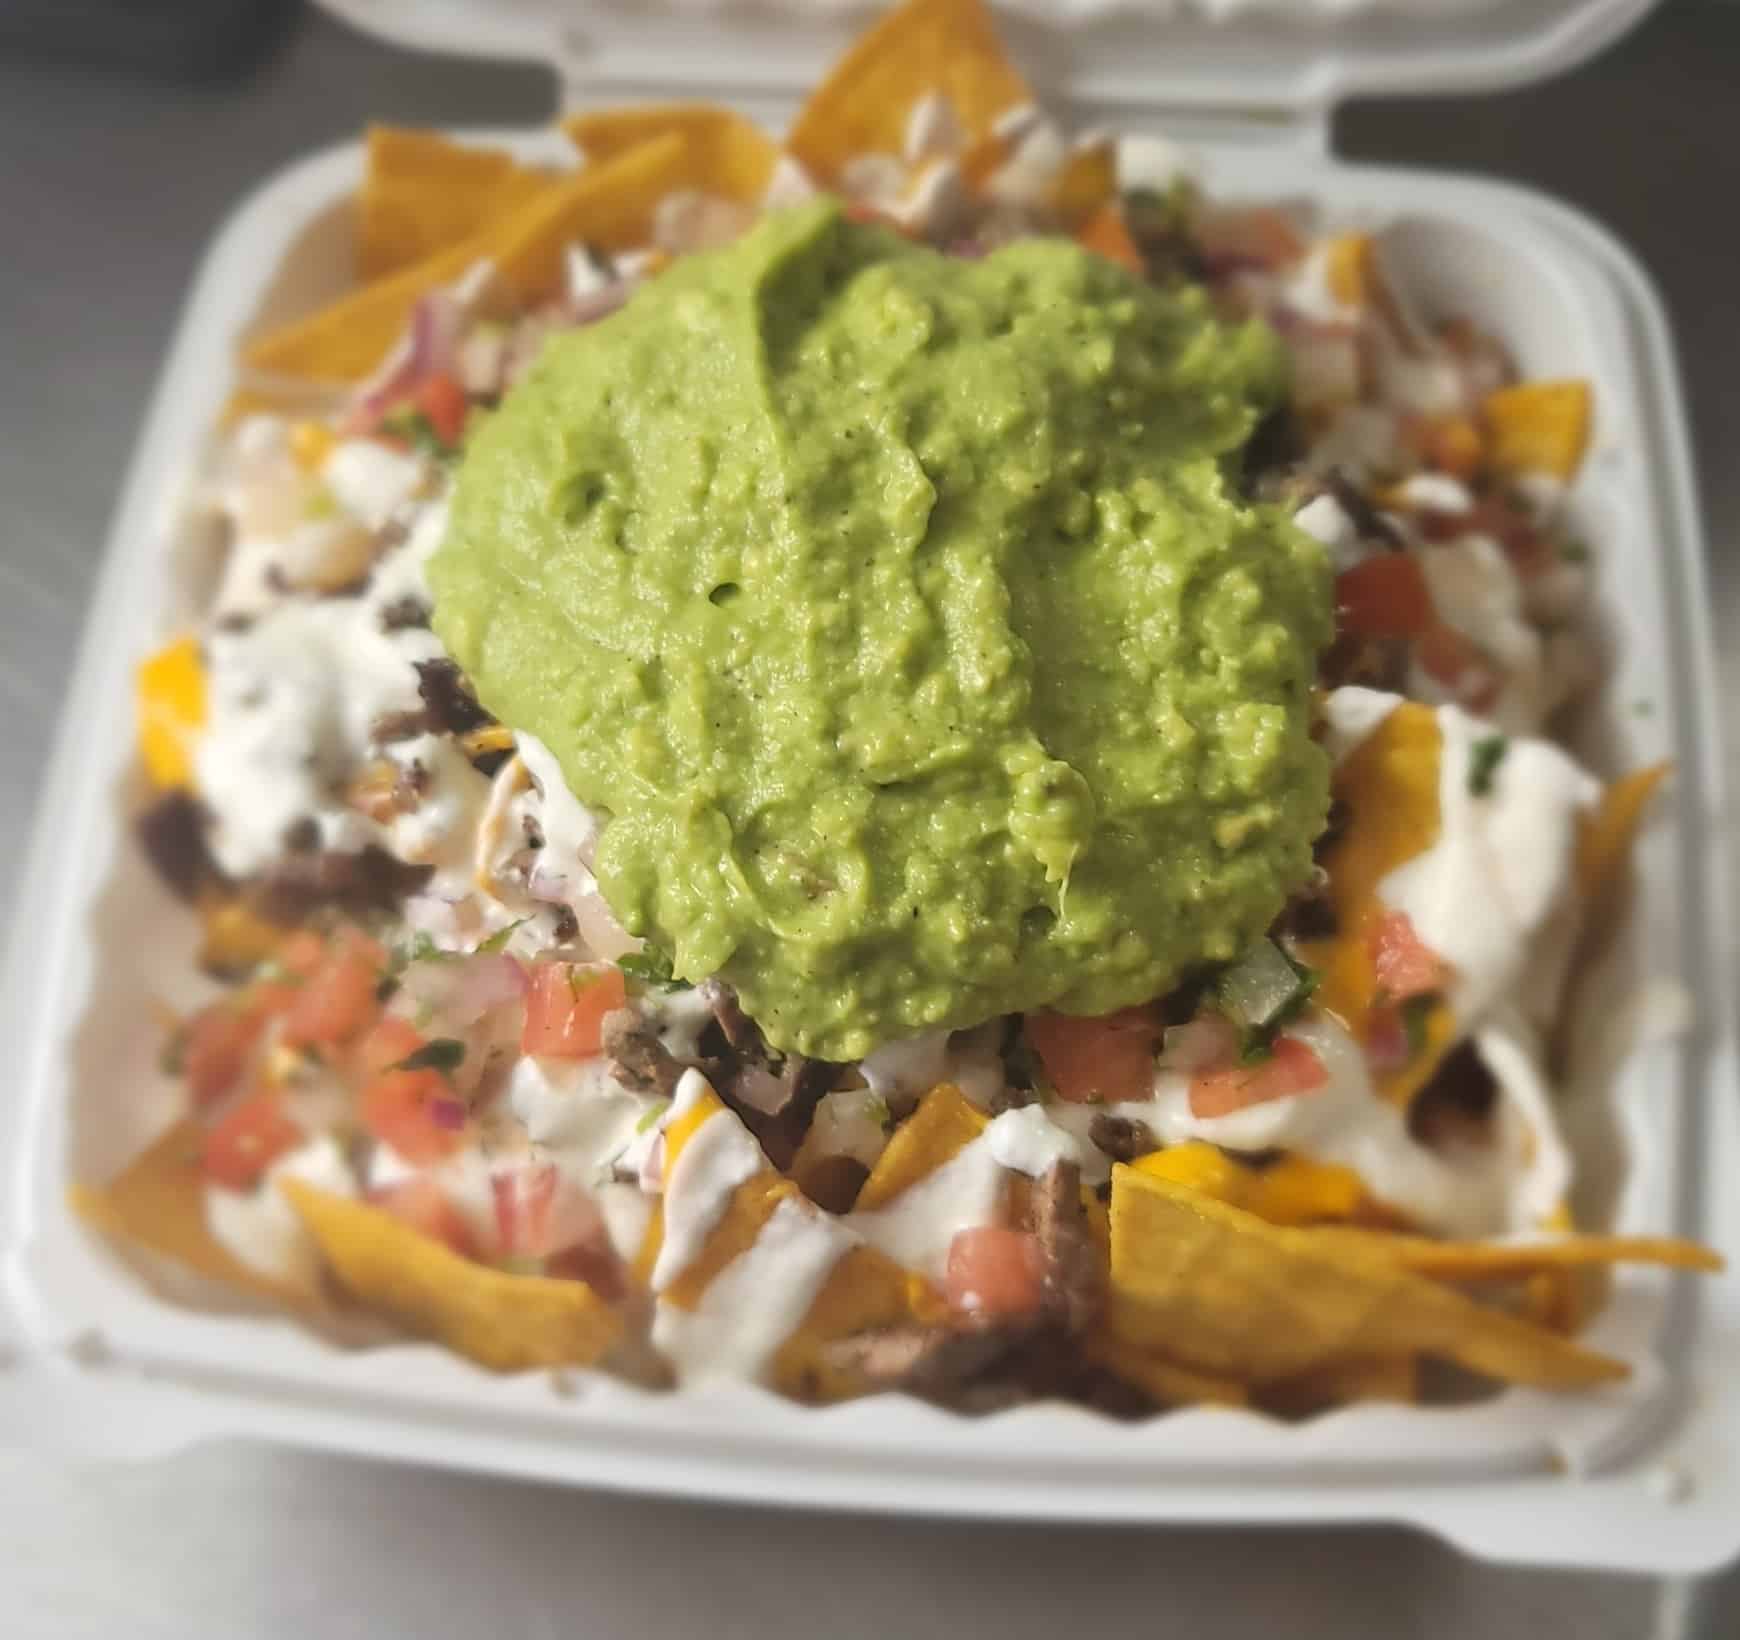 Nachos topped with Guacamole